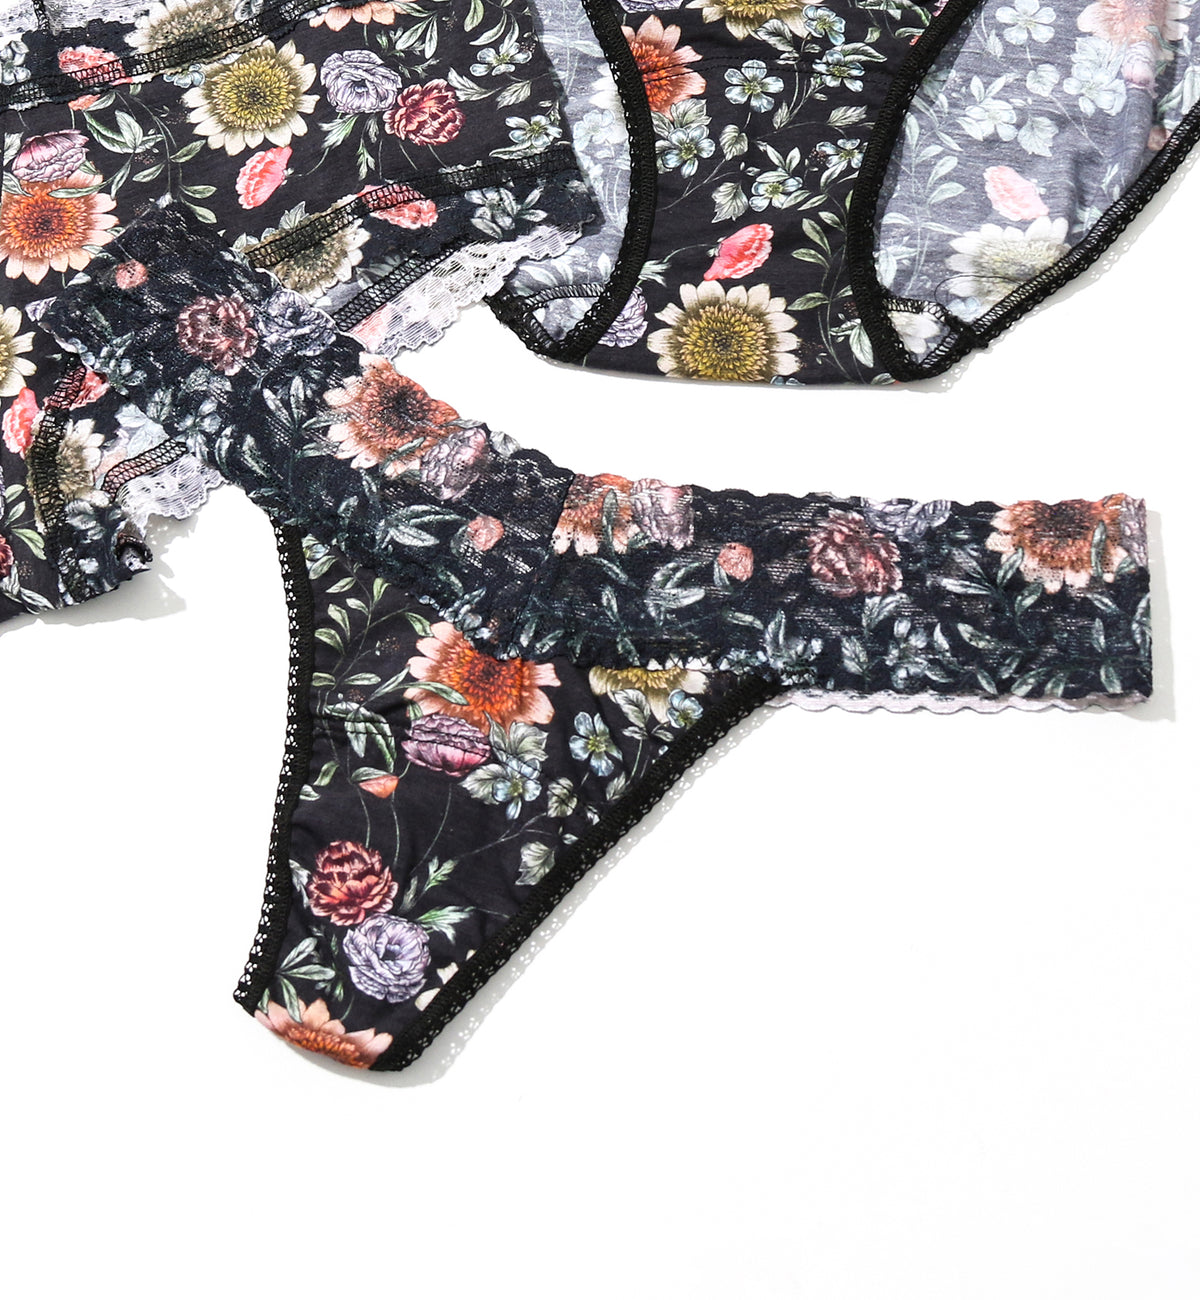 Hanky Panky Printed Organic Cotton Low Rise Thong (PR891581),Hampton Court Gardens - Hampton Court Gardens,One Size